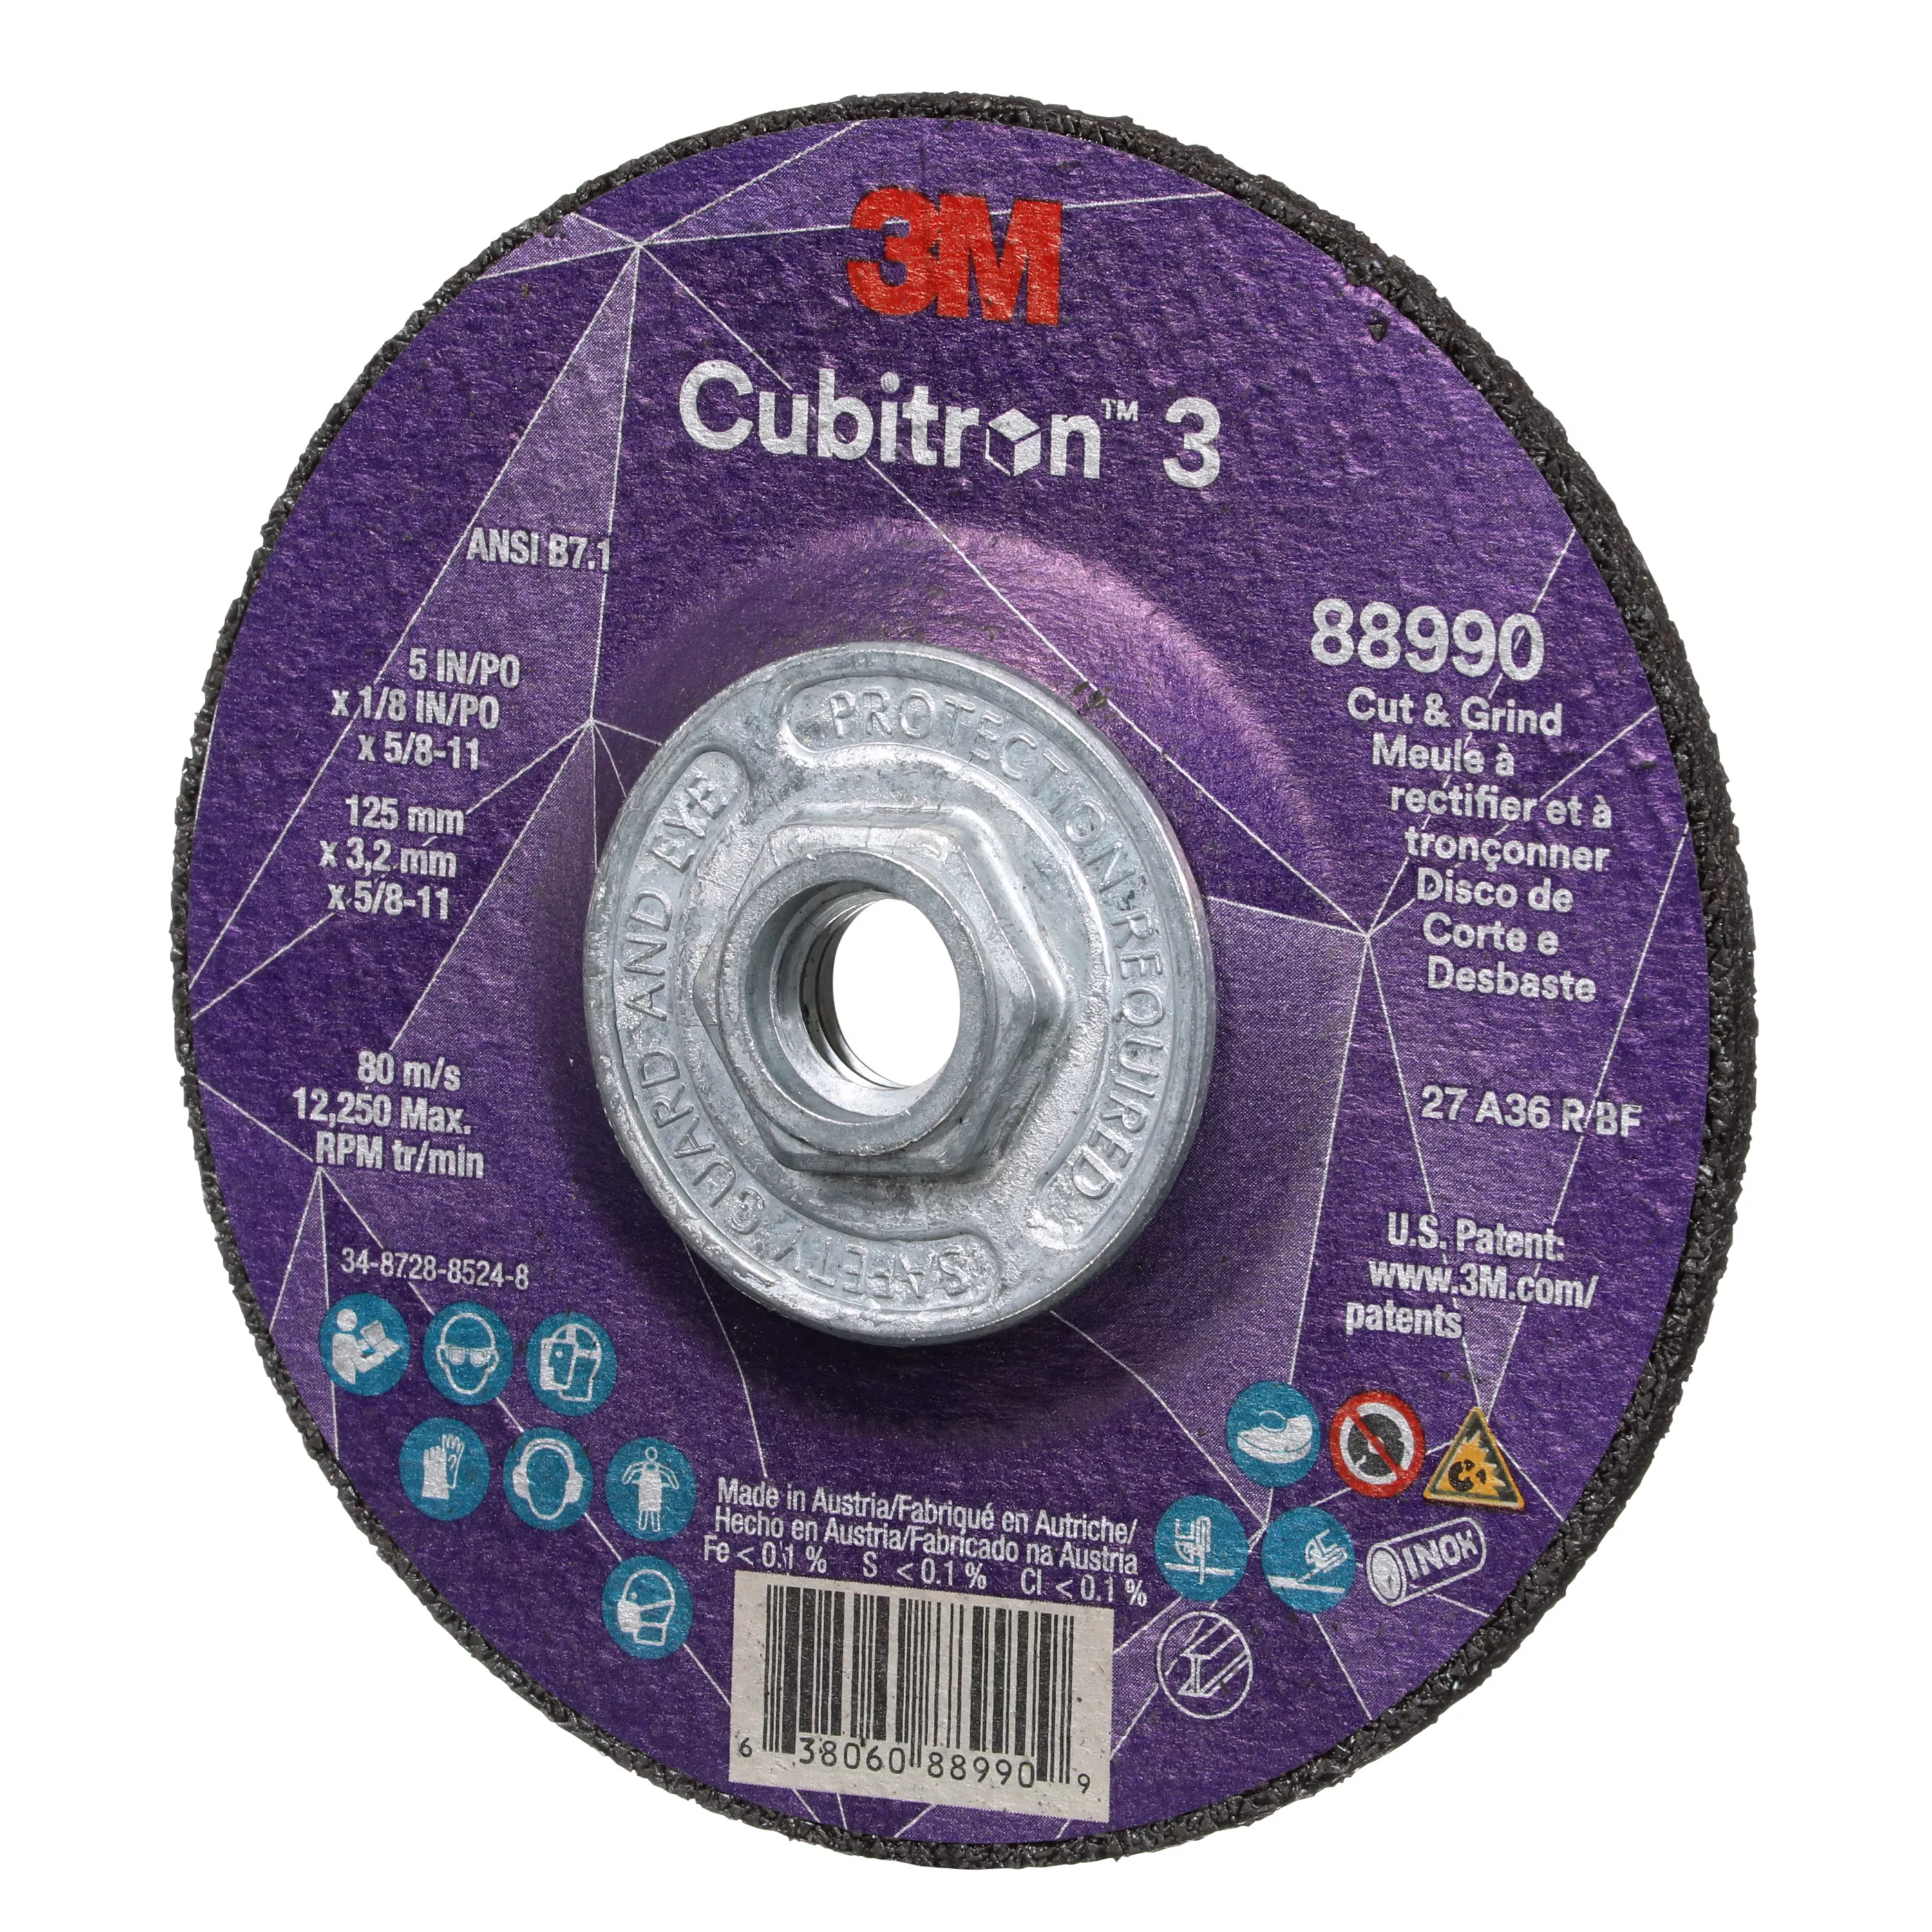 Product Number 88990 | 3M™ Cubitron™ 3 Cut and Grind Wheel